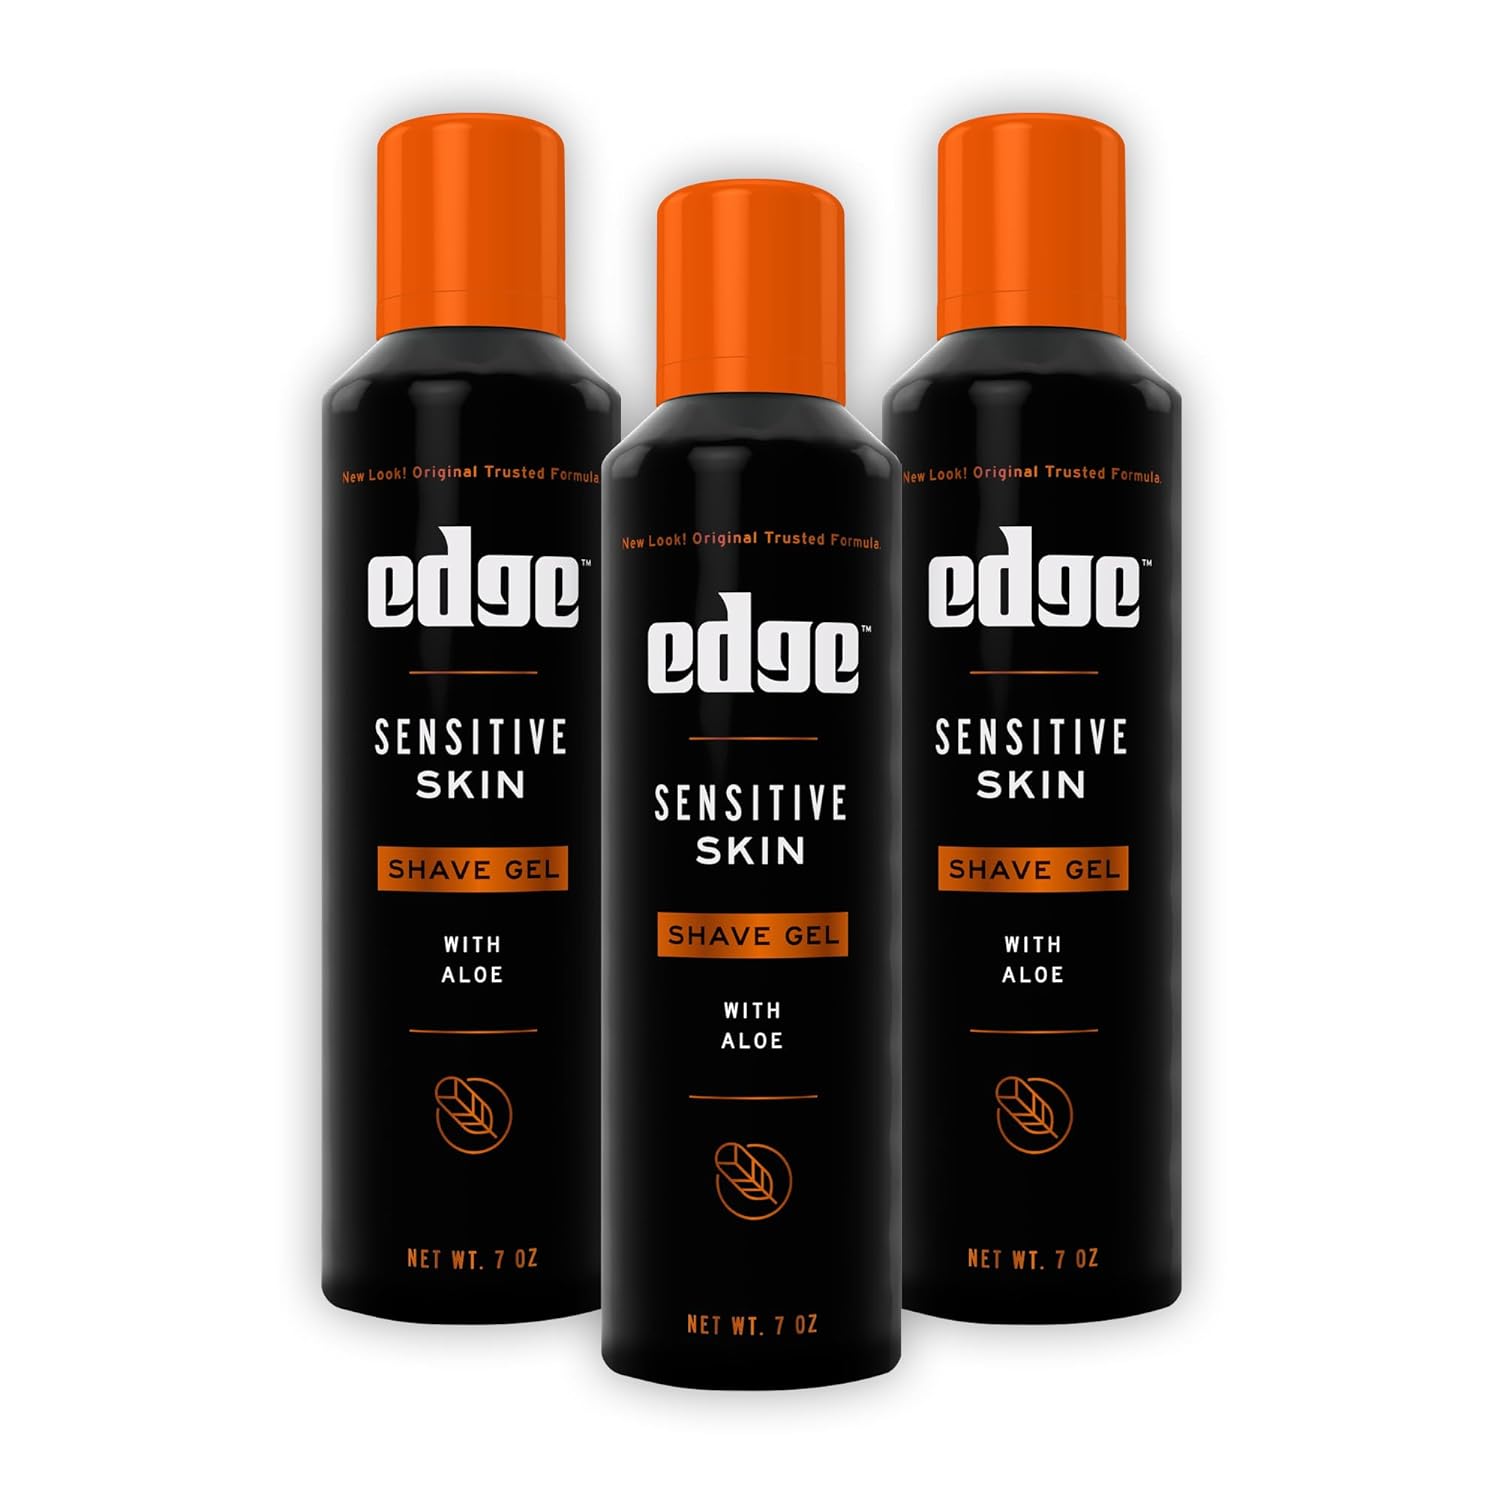 Edge Shave Gel for Men, Sensitive Skin with Aloe, 7oz (3 Pack) - Shaving Gel For Men That Moisturizes, Protects and Soothes To Help Reduce Skin Irritation